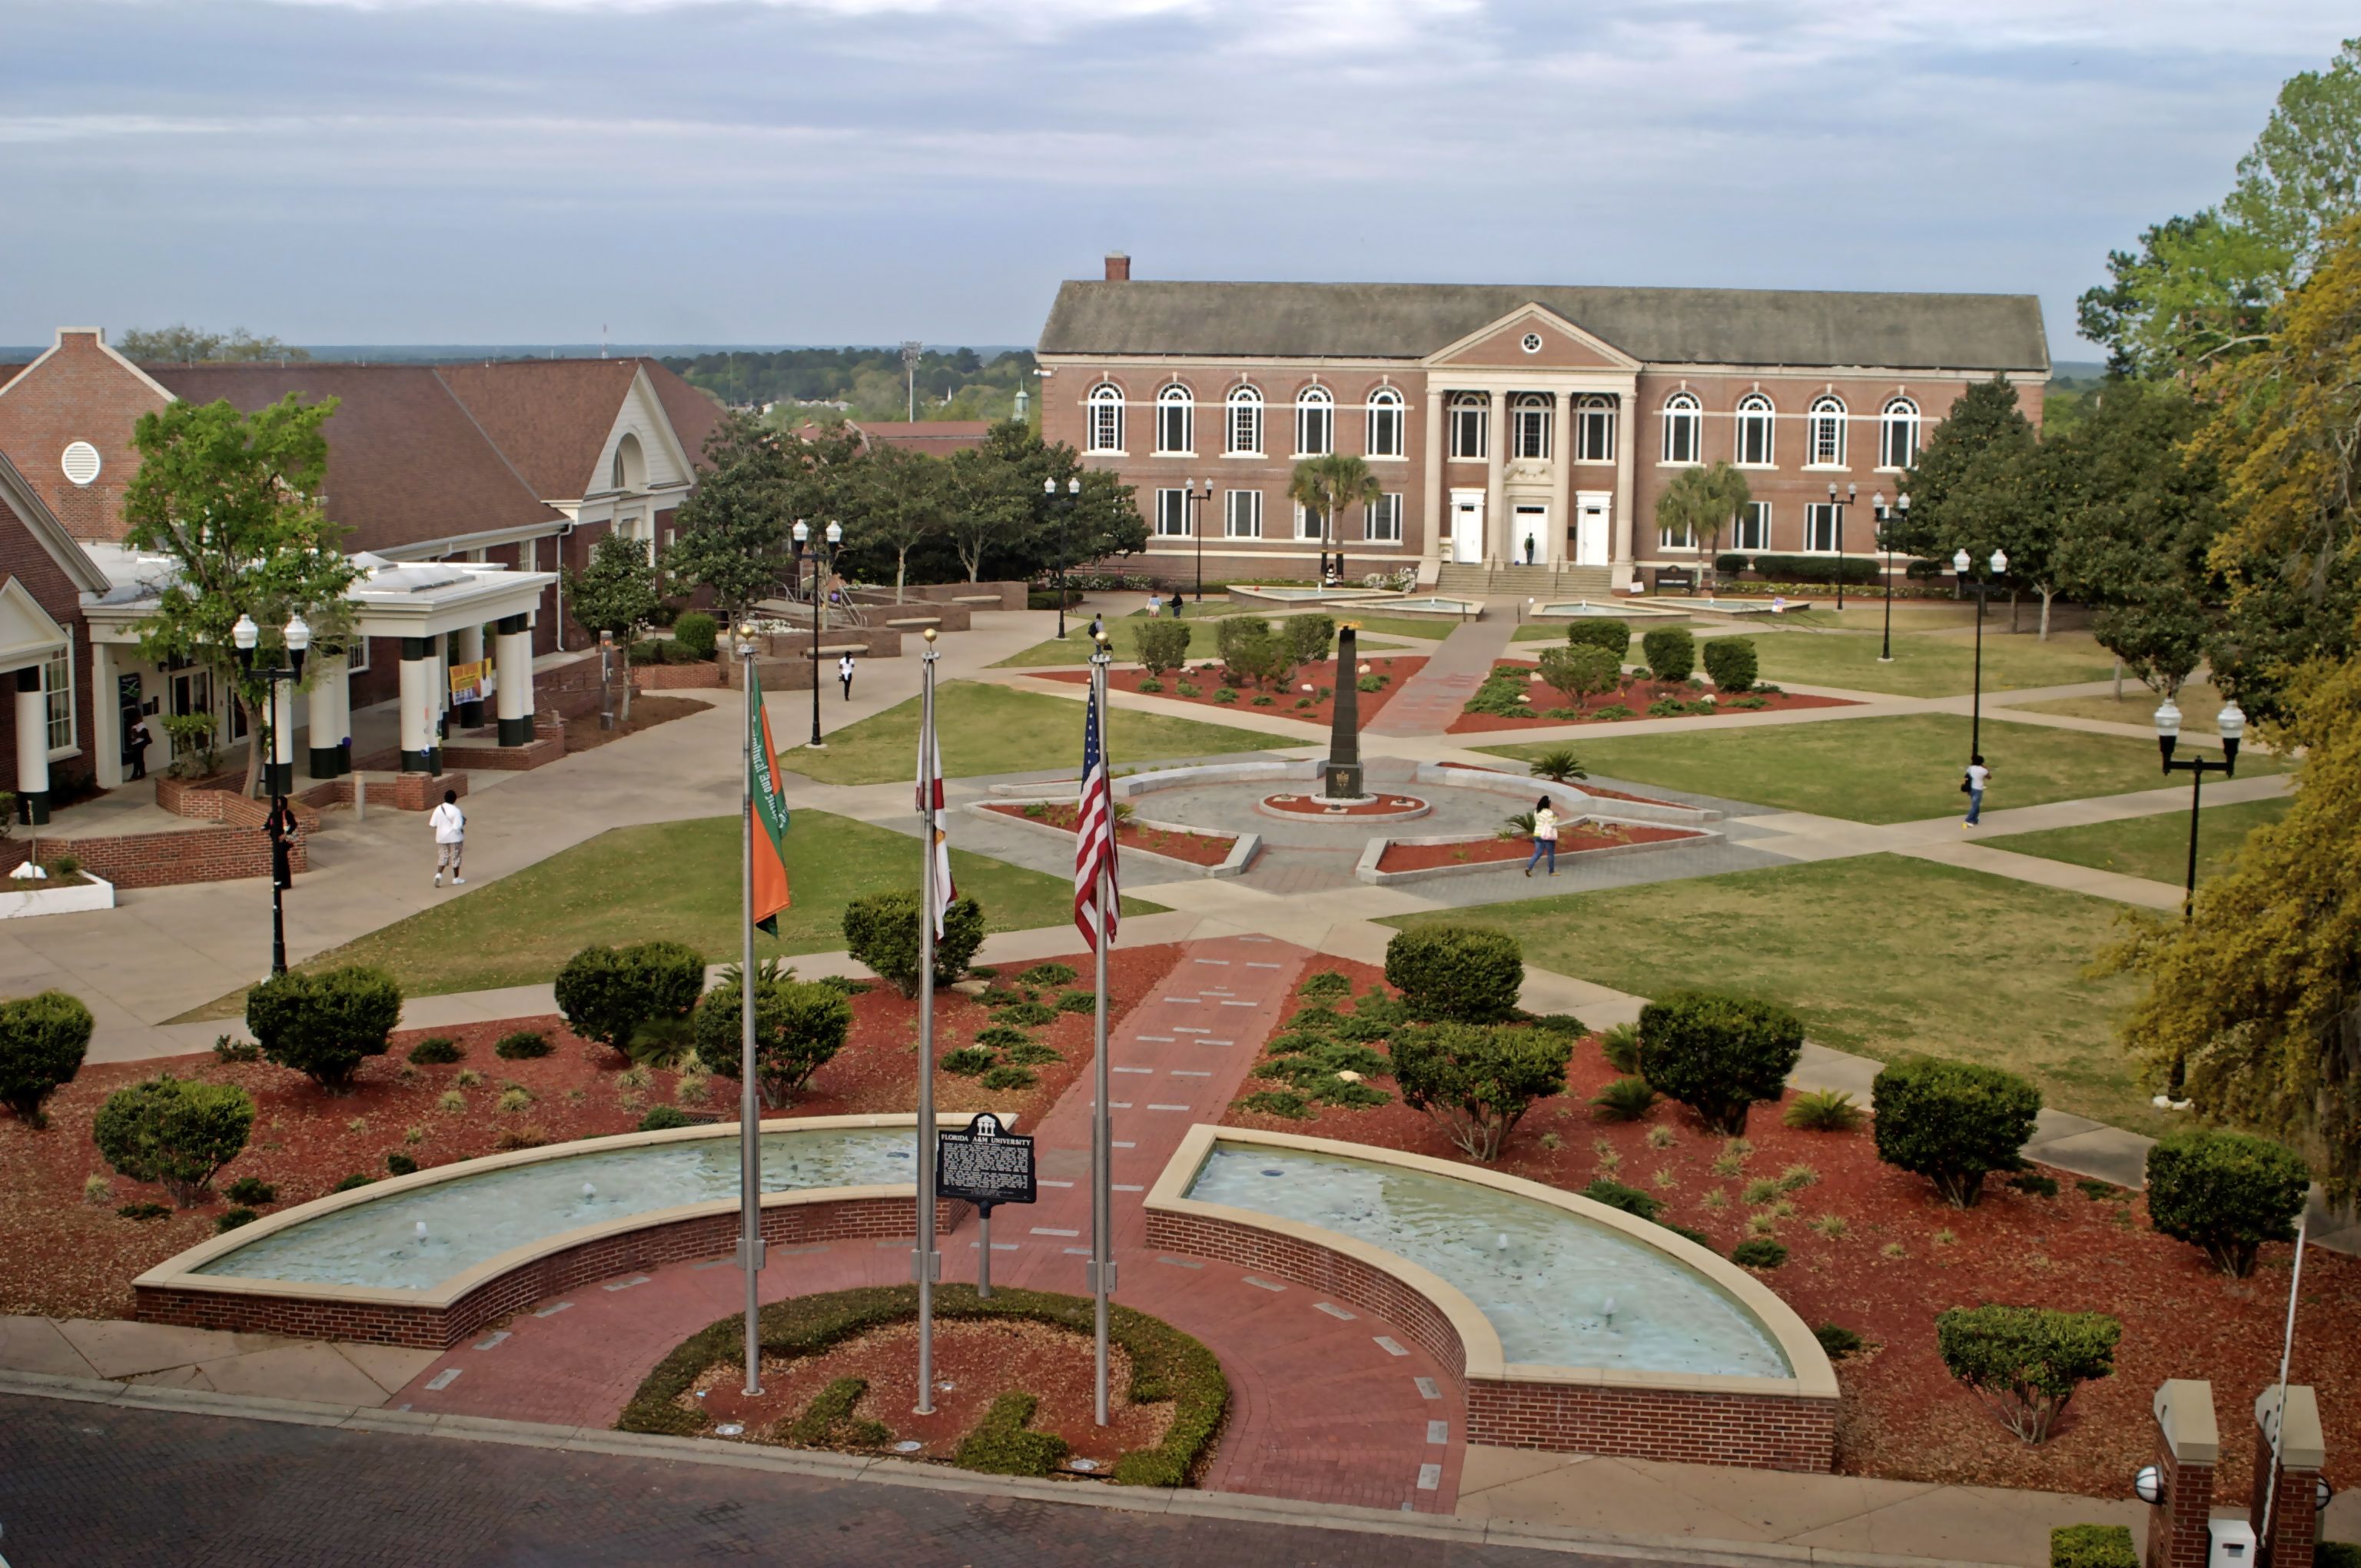 A photo of a college campus that looks down on the campus as if the photo was taken from an upper story. The campus has central lawn with decorative geometric walkways with modern fountains at the entrance. Buildings surround the central lawn.